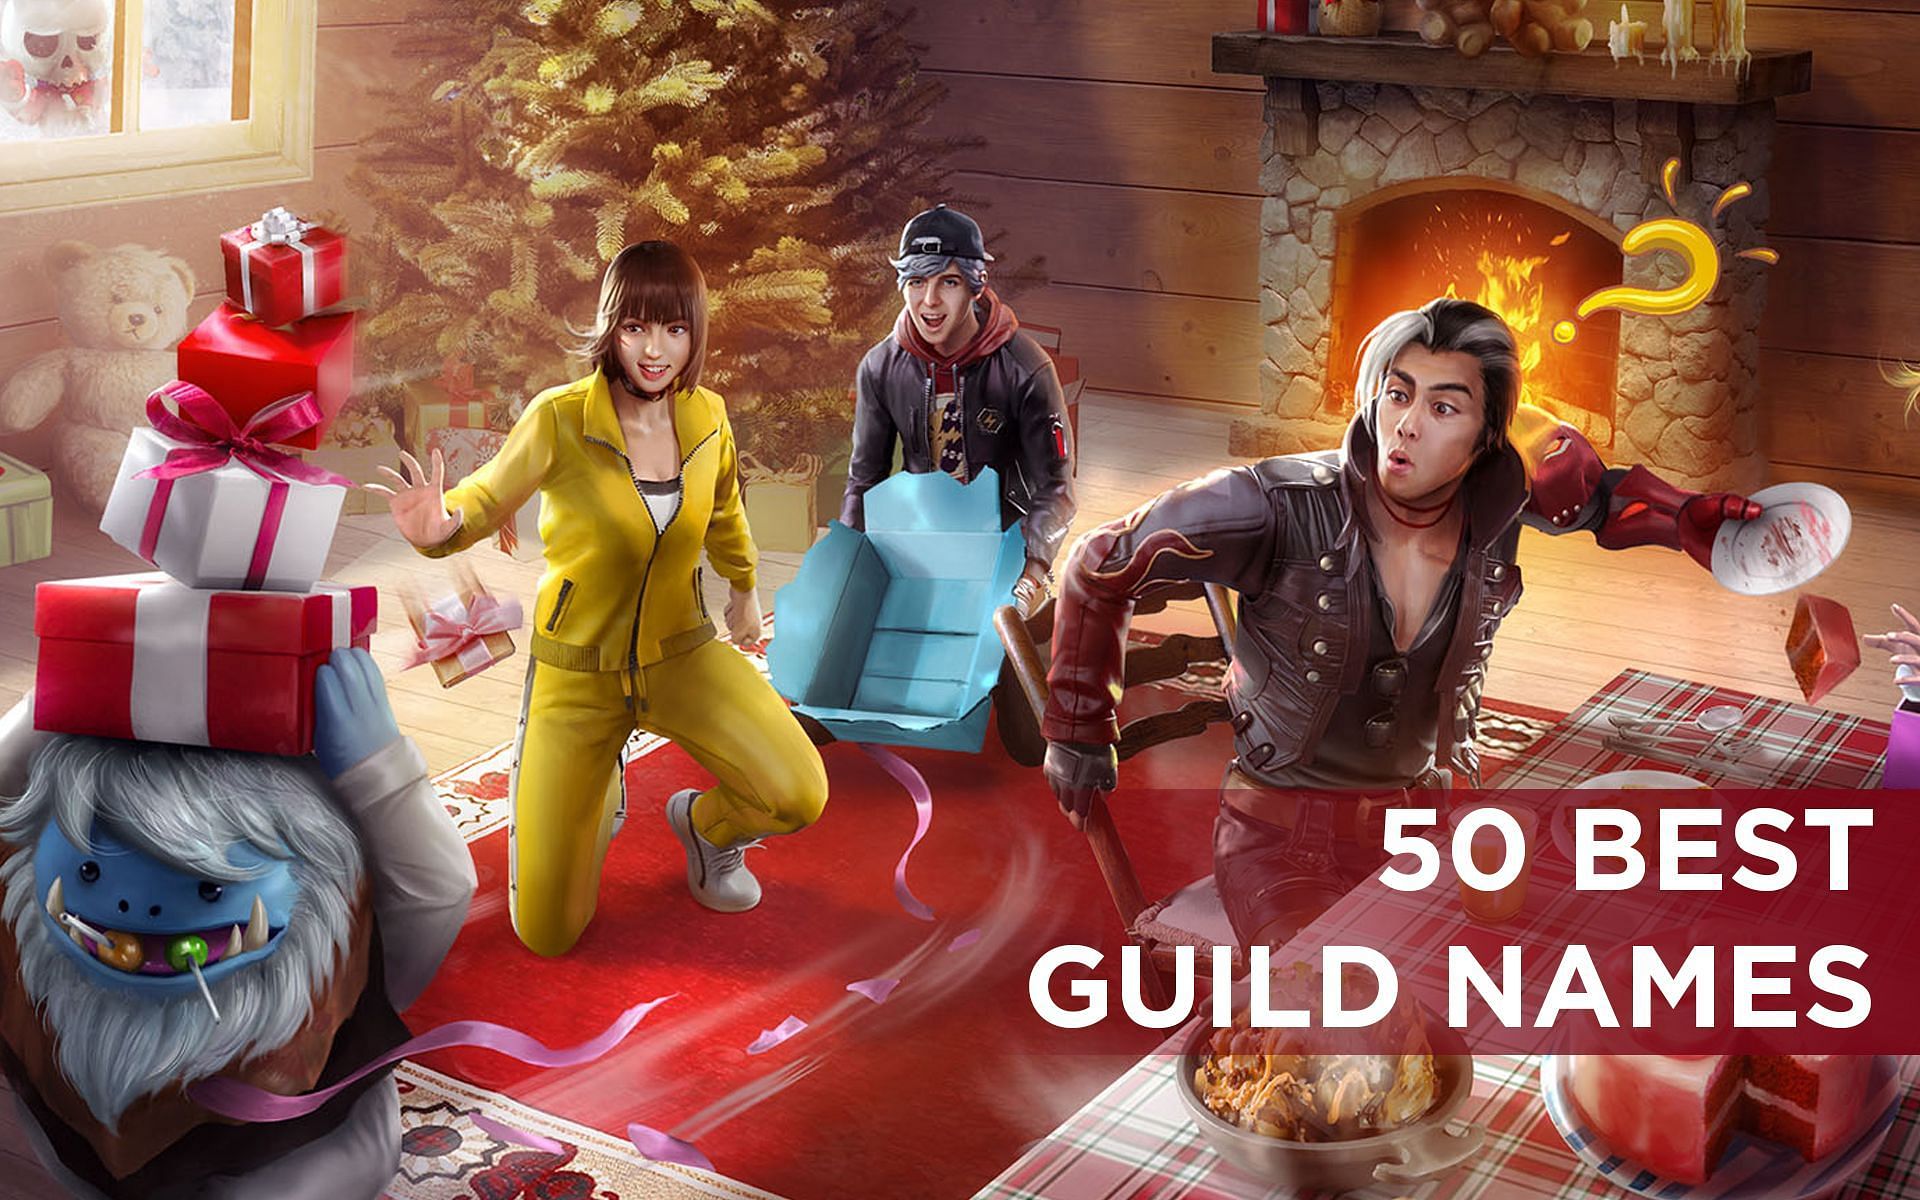 Many users search for guild names that they can use in Free Fire (Image via Sportskeeda)